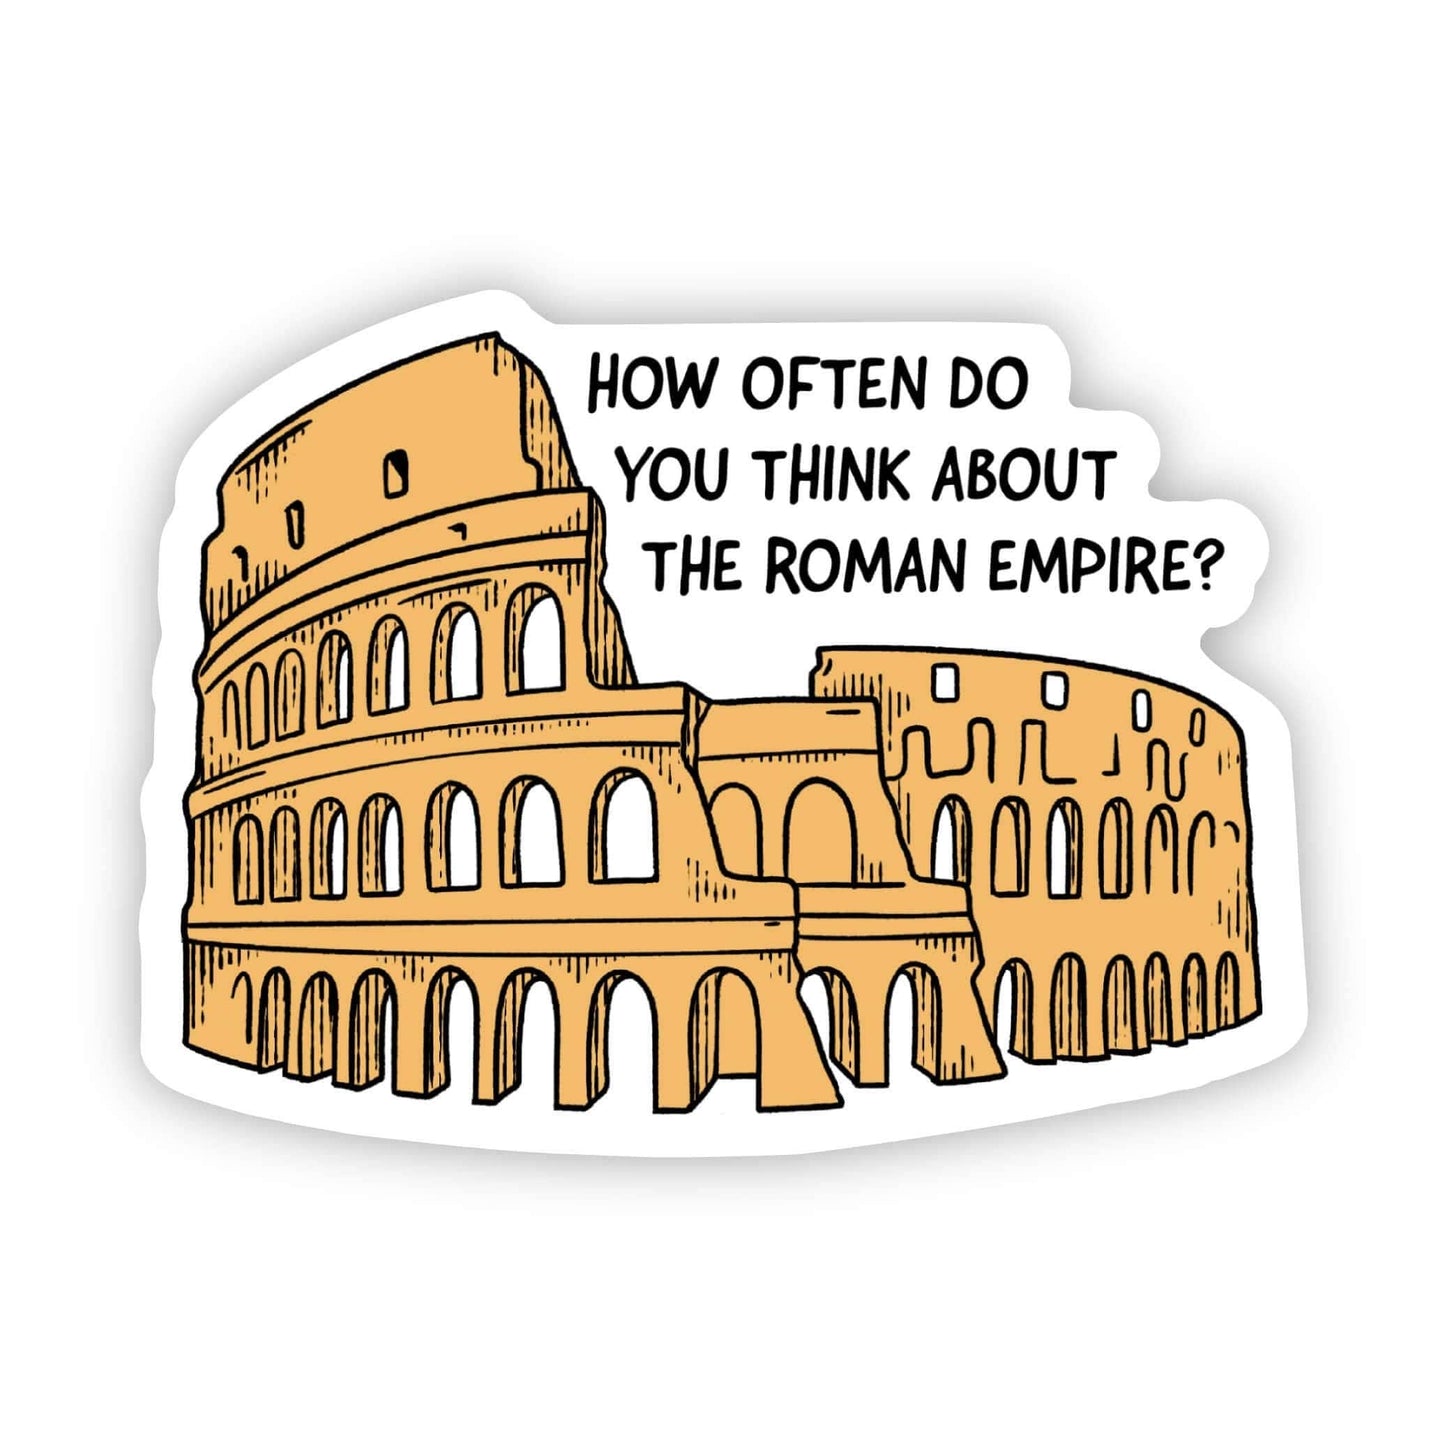 "How often do you think about the Roman Empire?" Colosseum Sticker